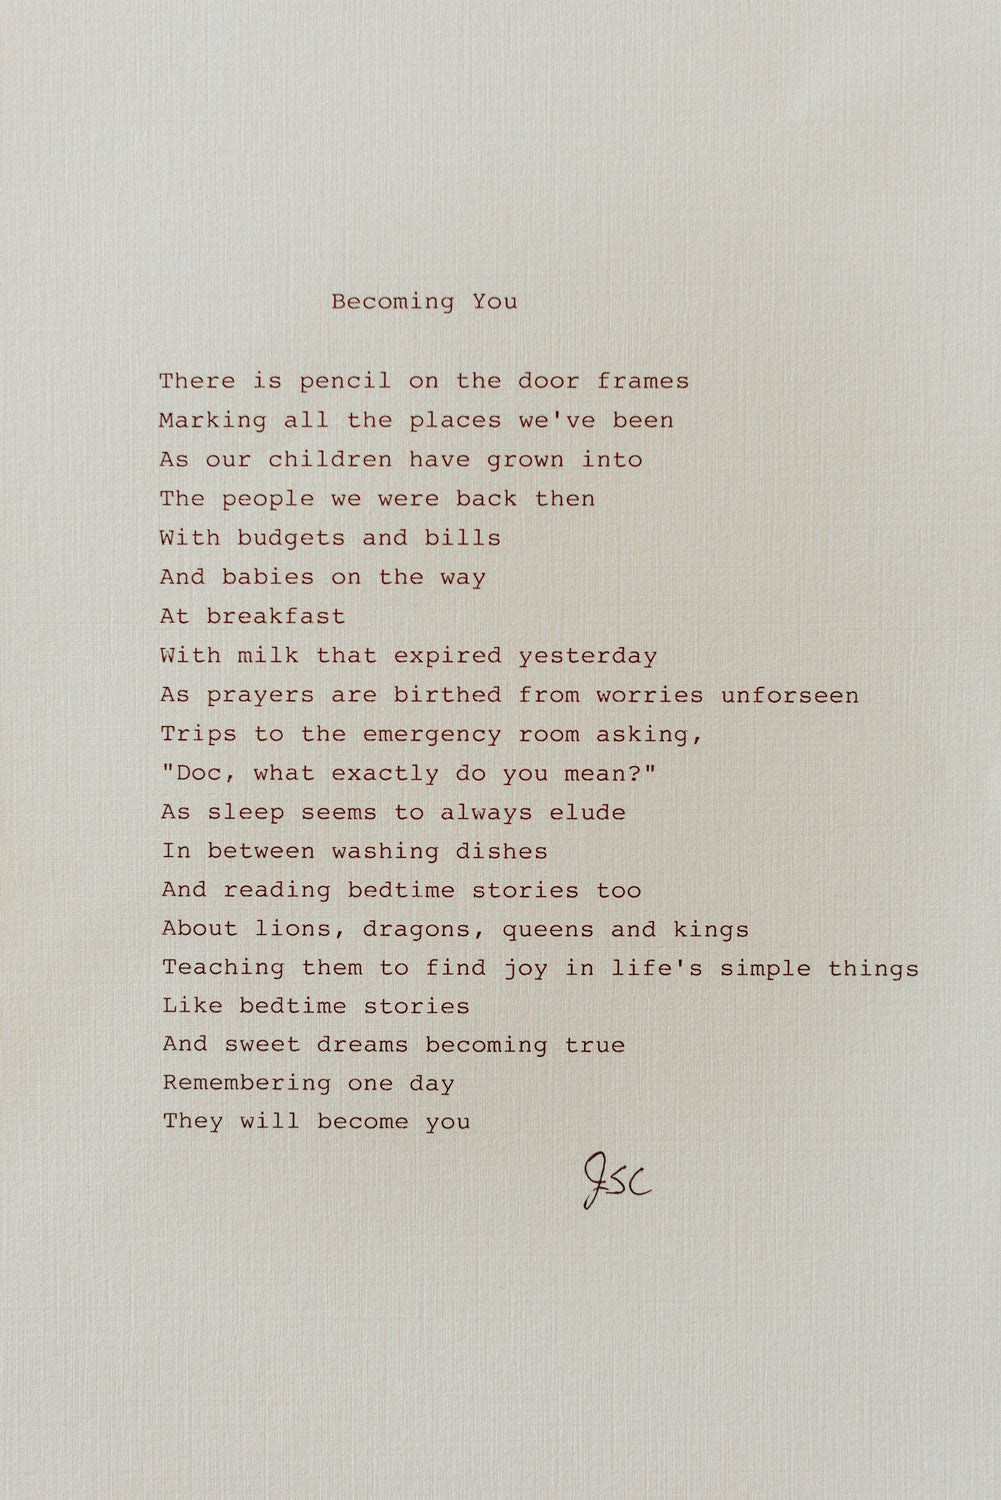 "Becoming You" Poem